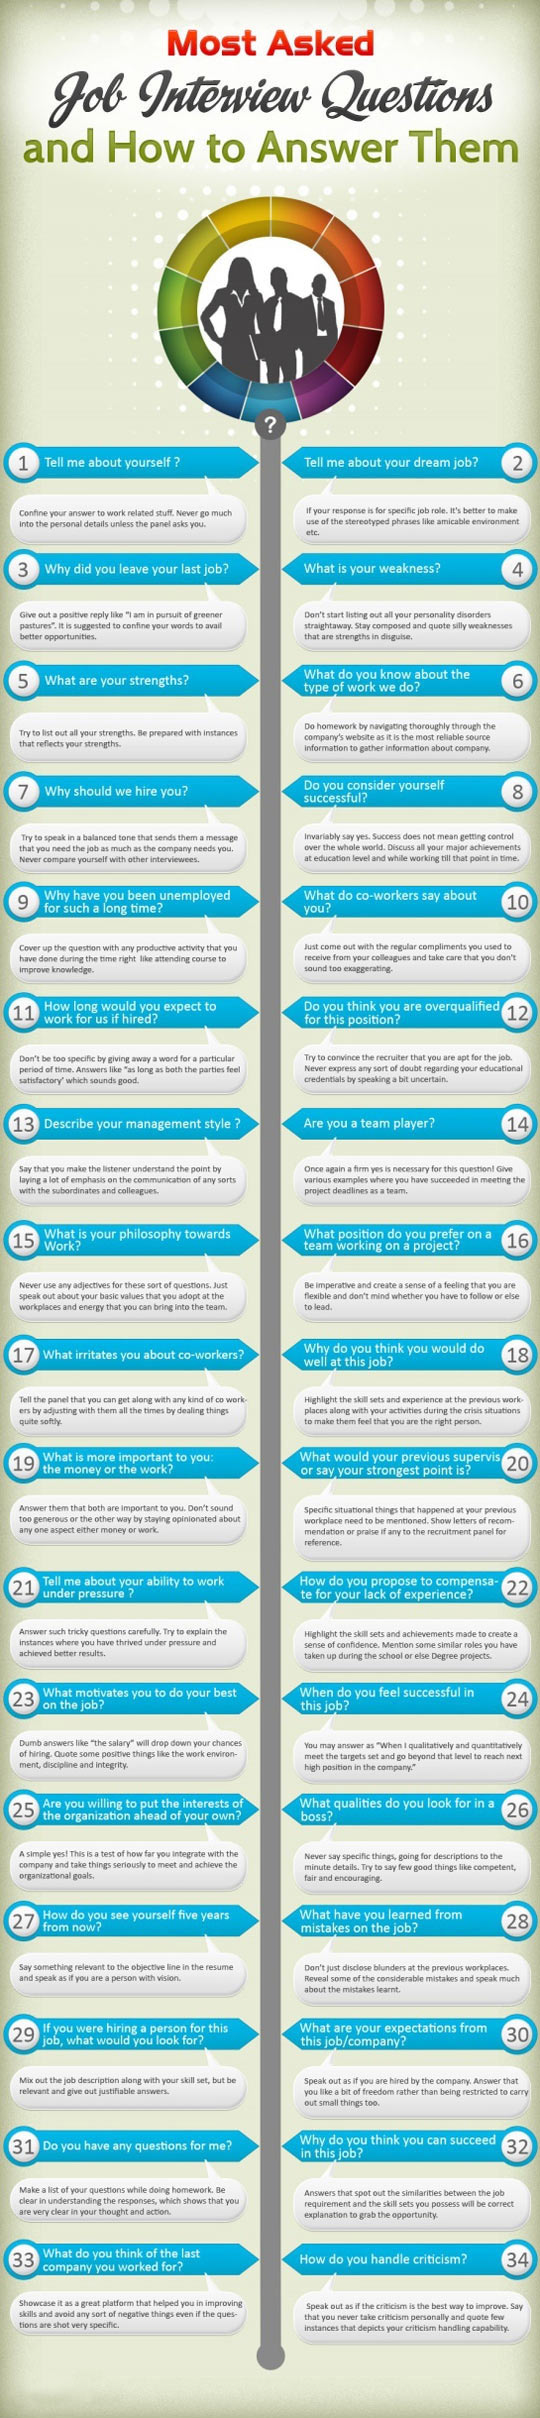 Most Asked Job Interview Questions